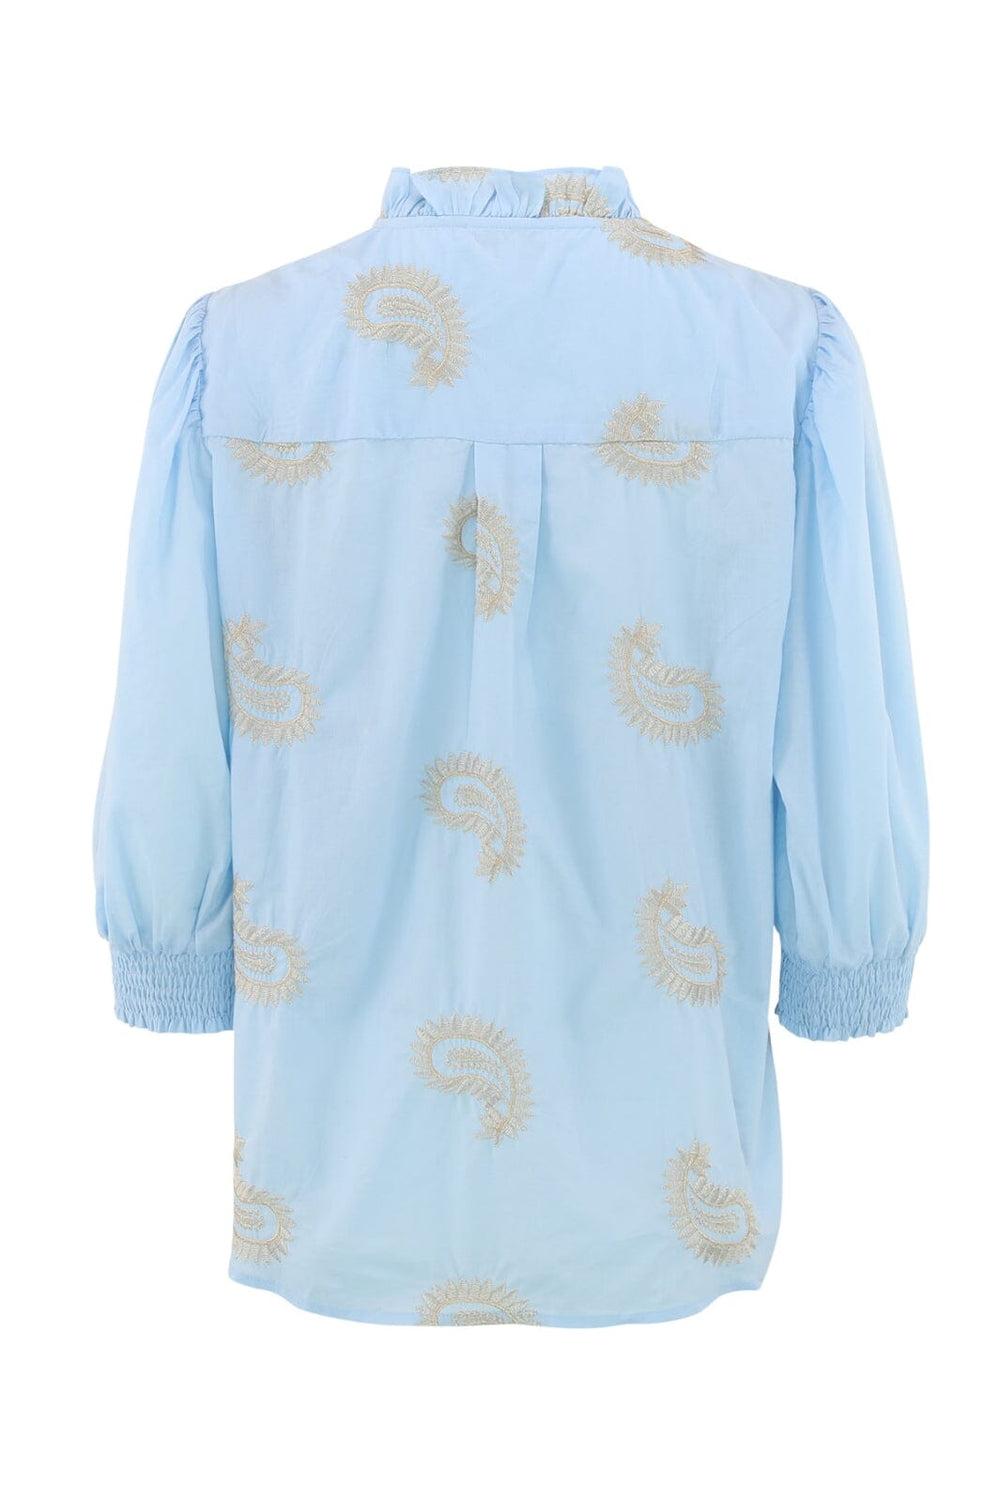 Continue - Chania Gold - Light Blue Bluser 